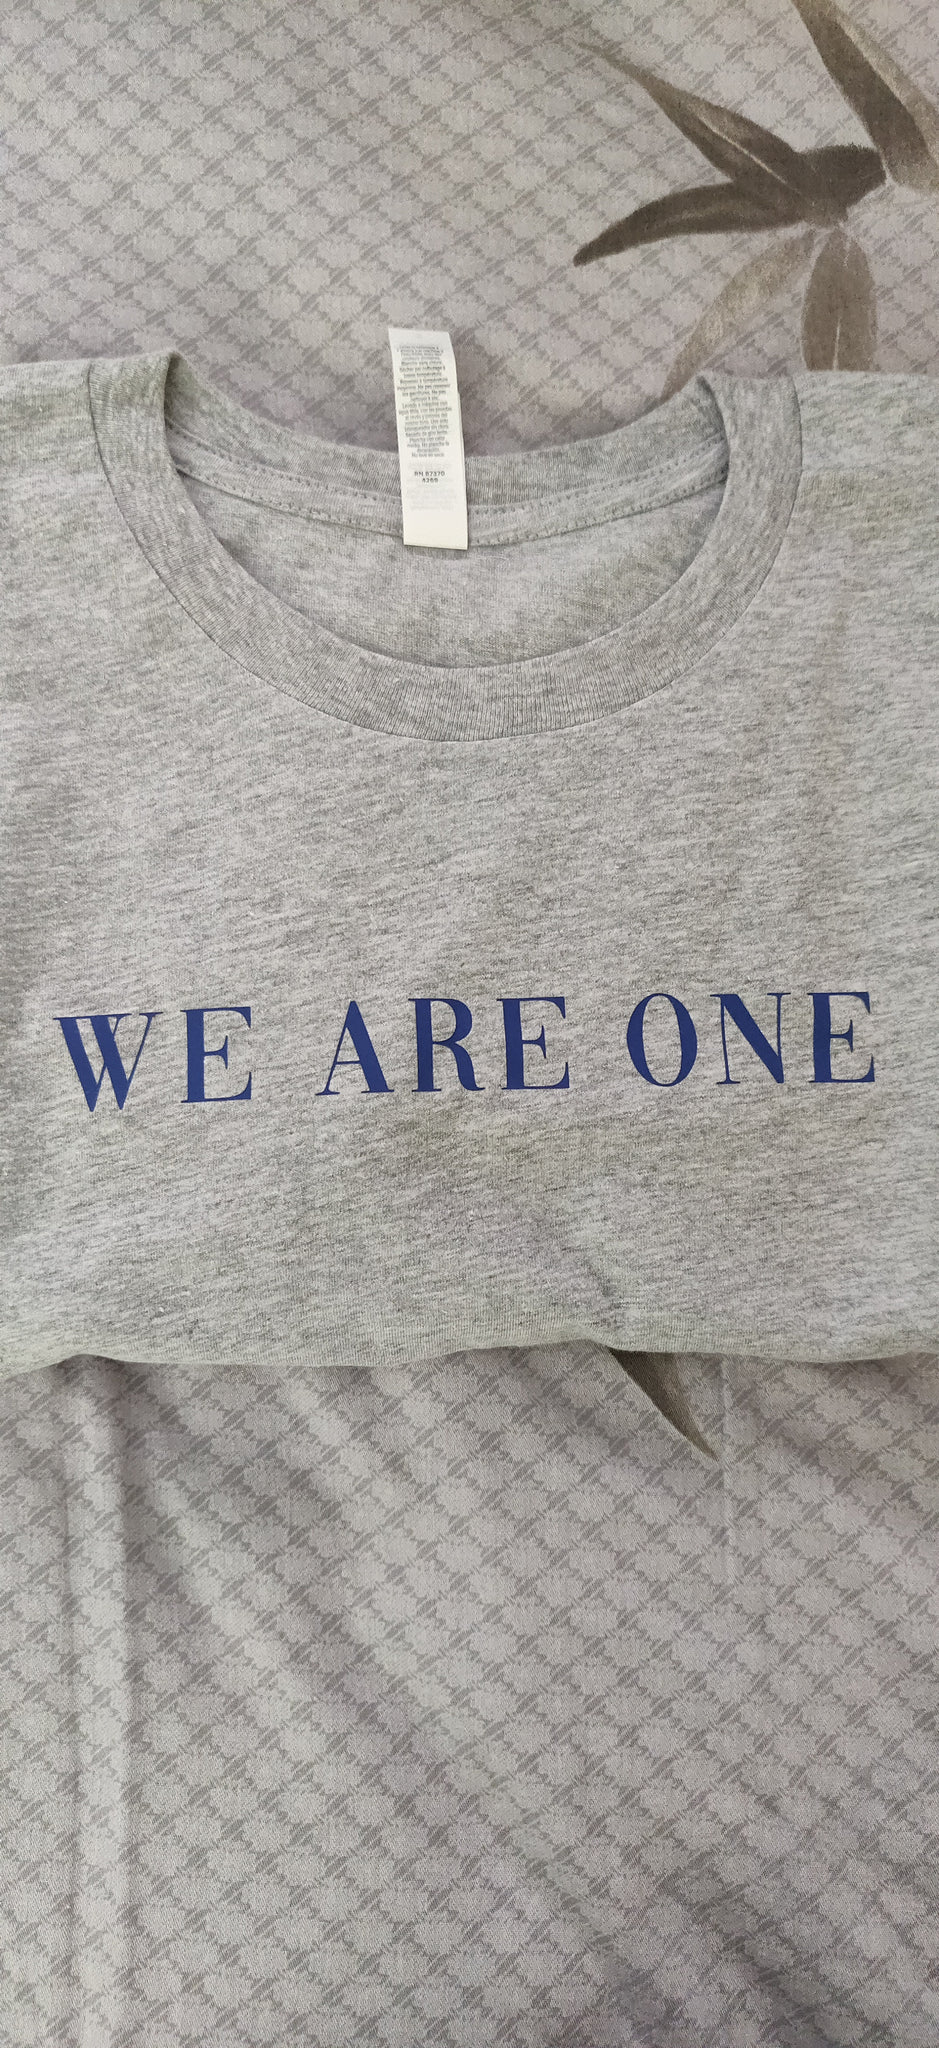 We are one shirt